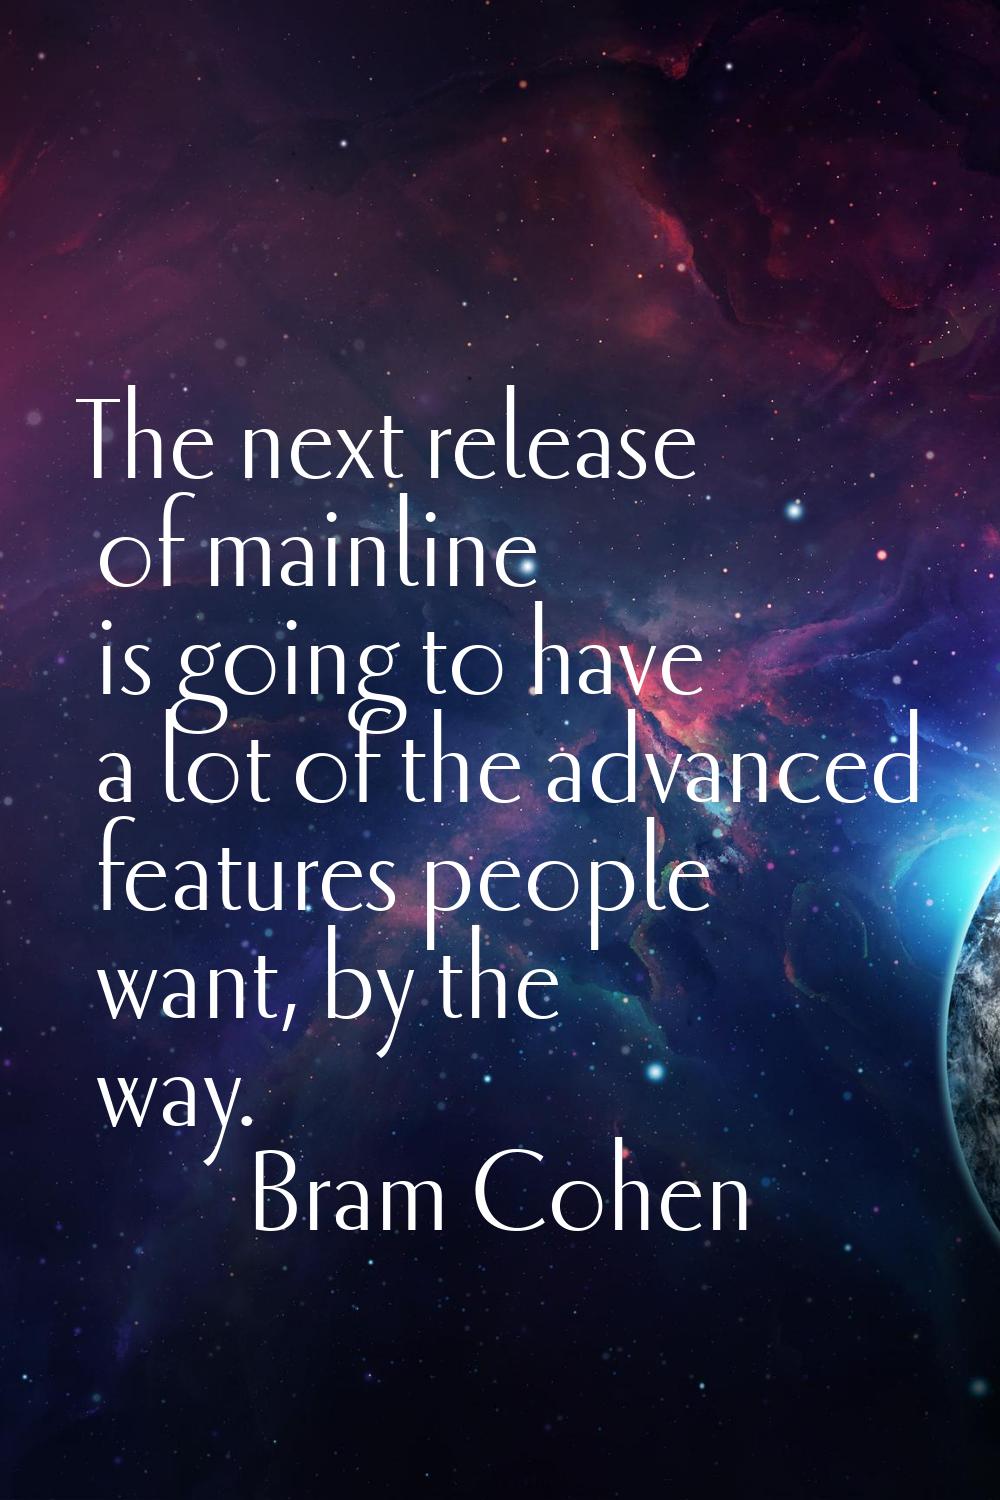 The next release of mainline is going to have a lot of the advanced features people want, by the wa